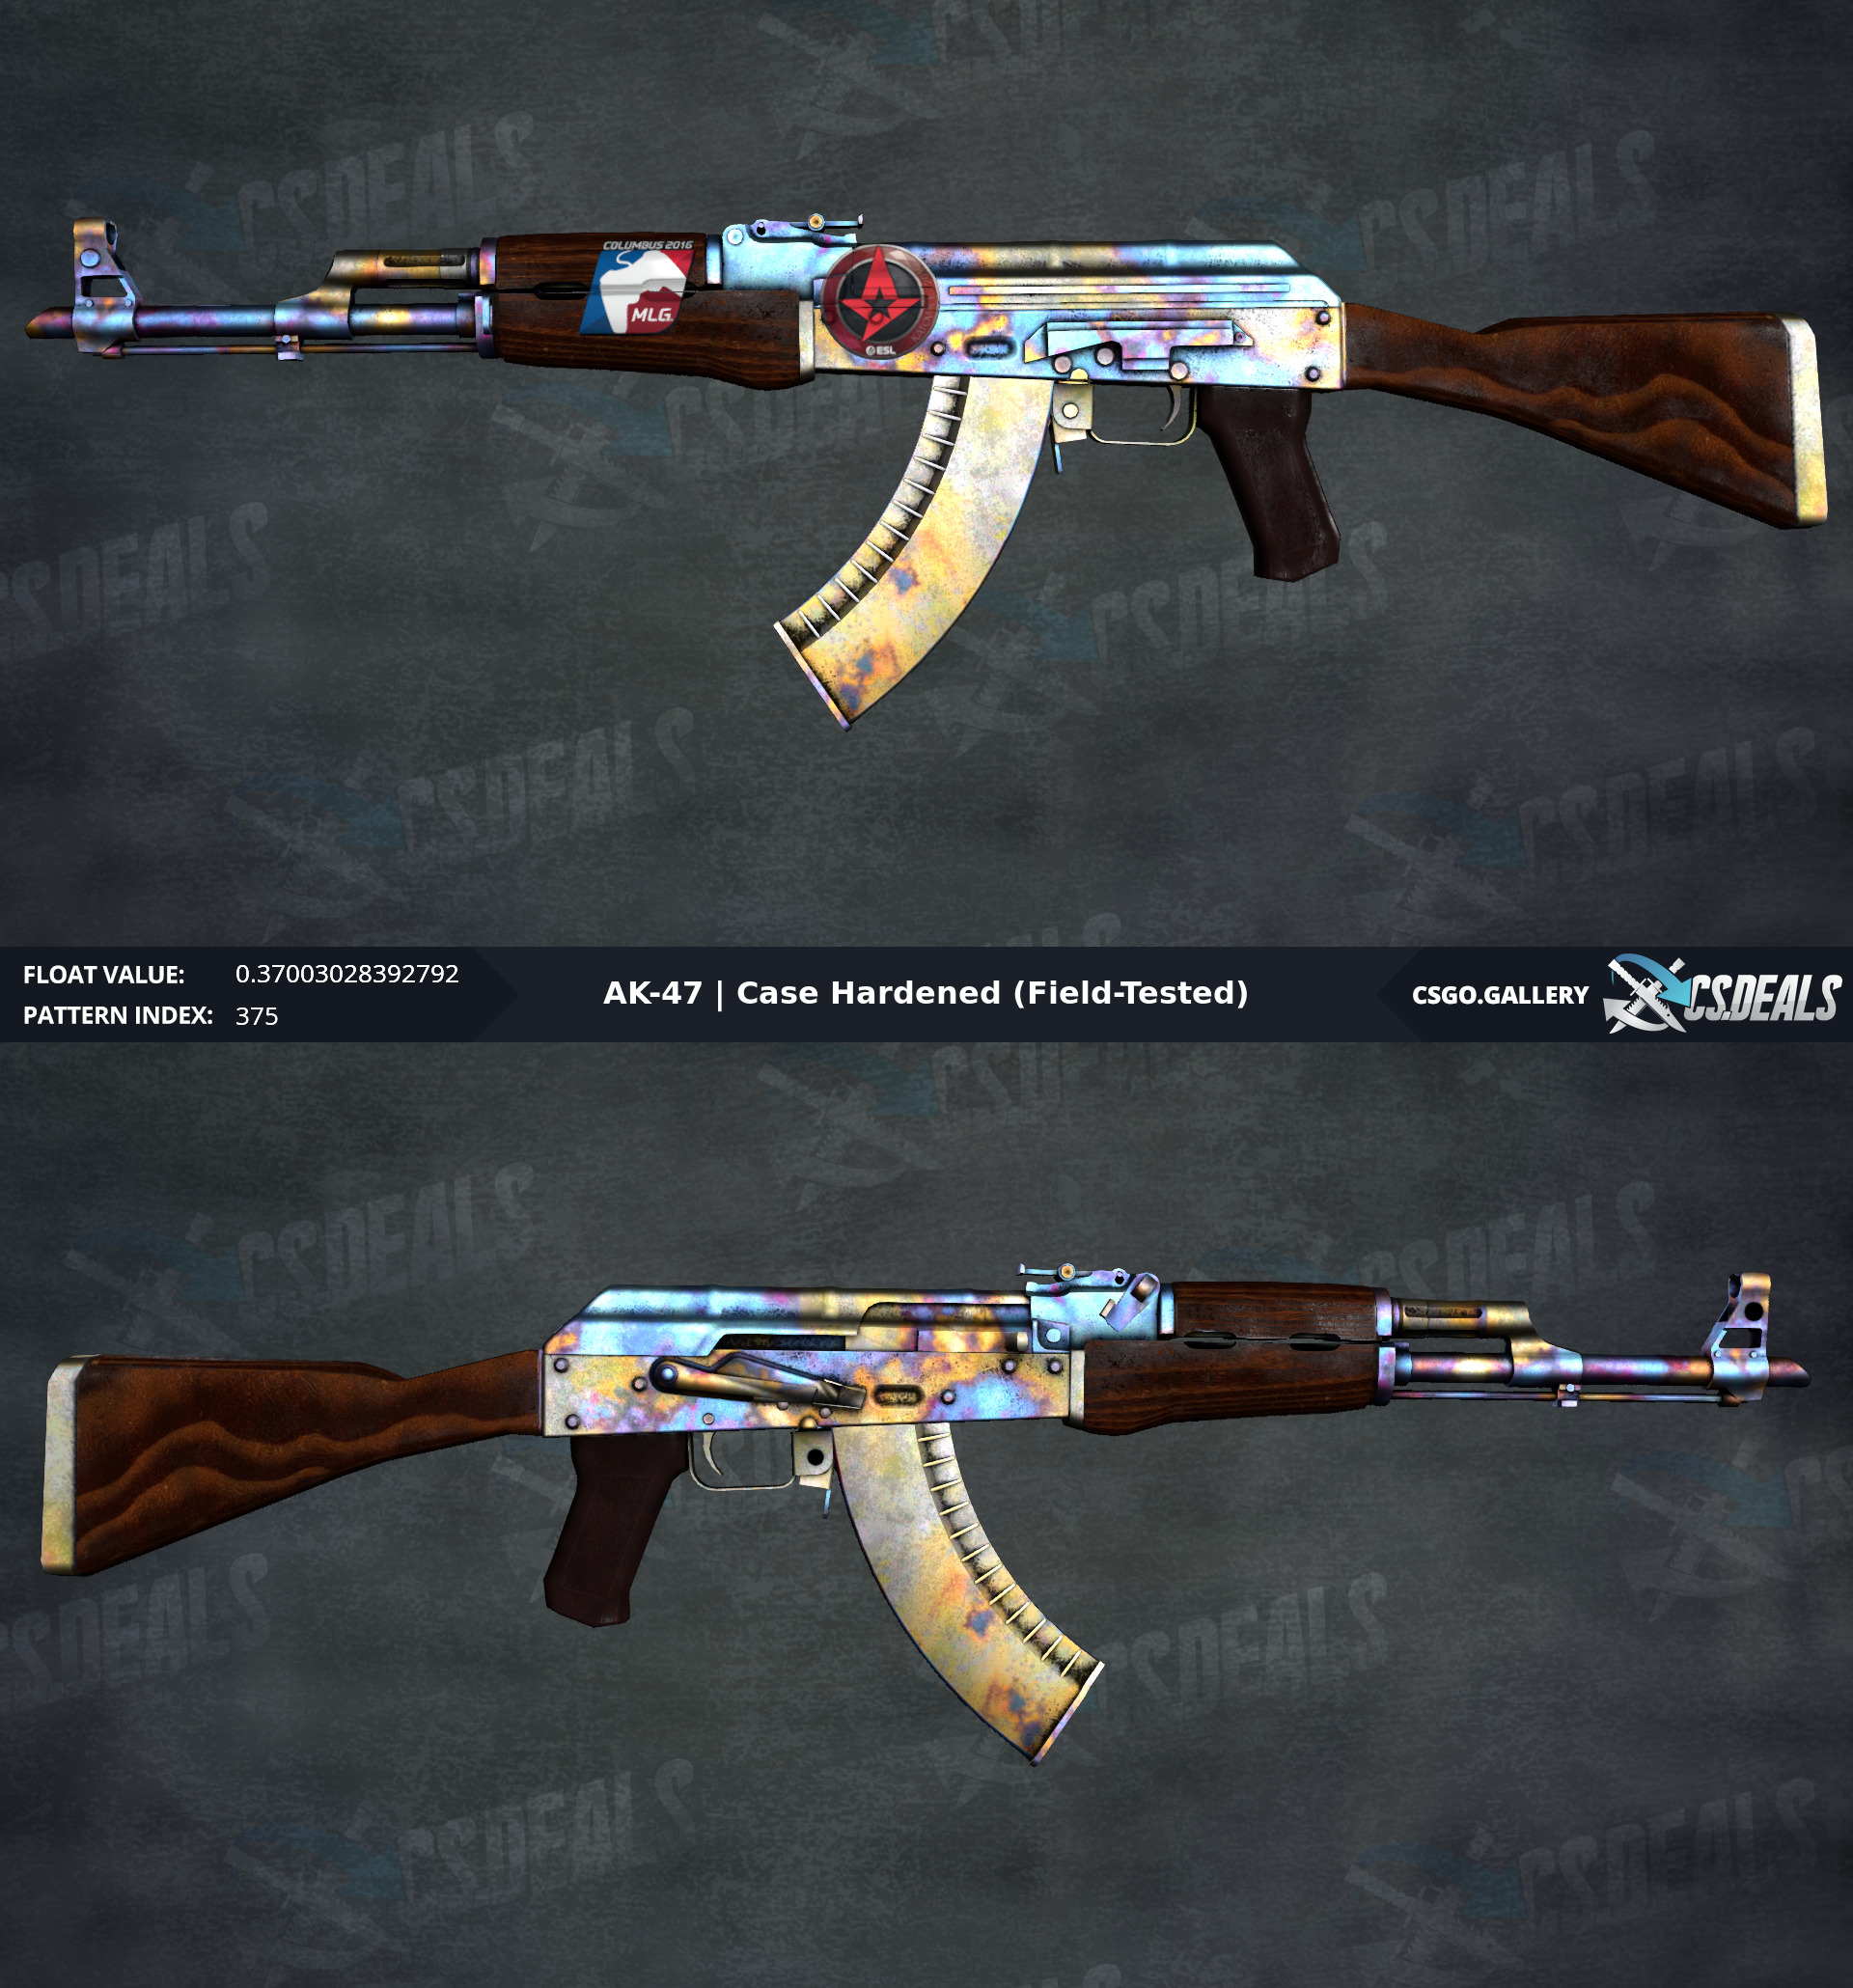 pattern Rank on AK-47 Case Hardened and price value in 2020 Page 2.